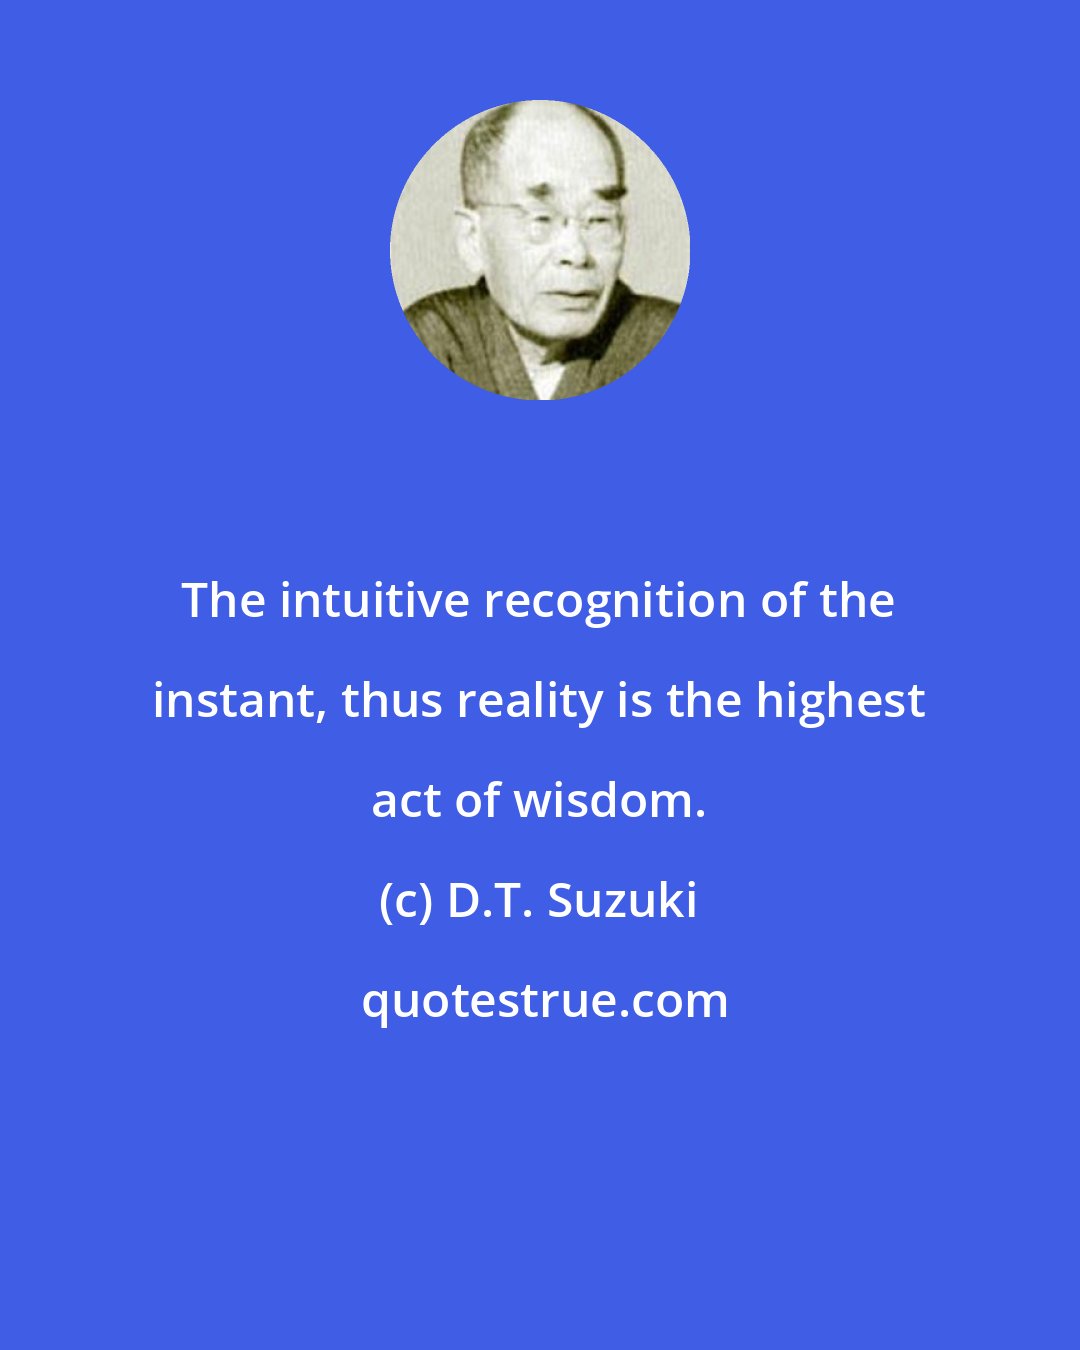 D.T. Suzuki: The intuitive recognition of the instant, thus reality is the highest act of wisdom.